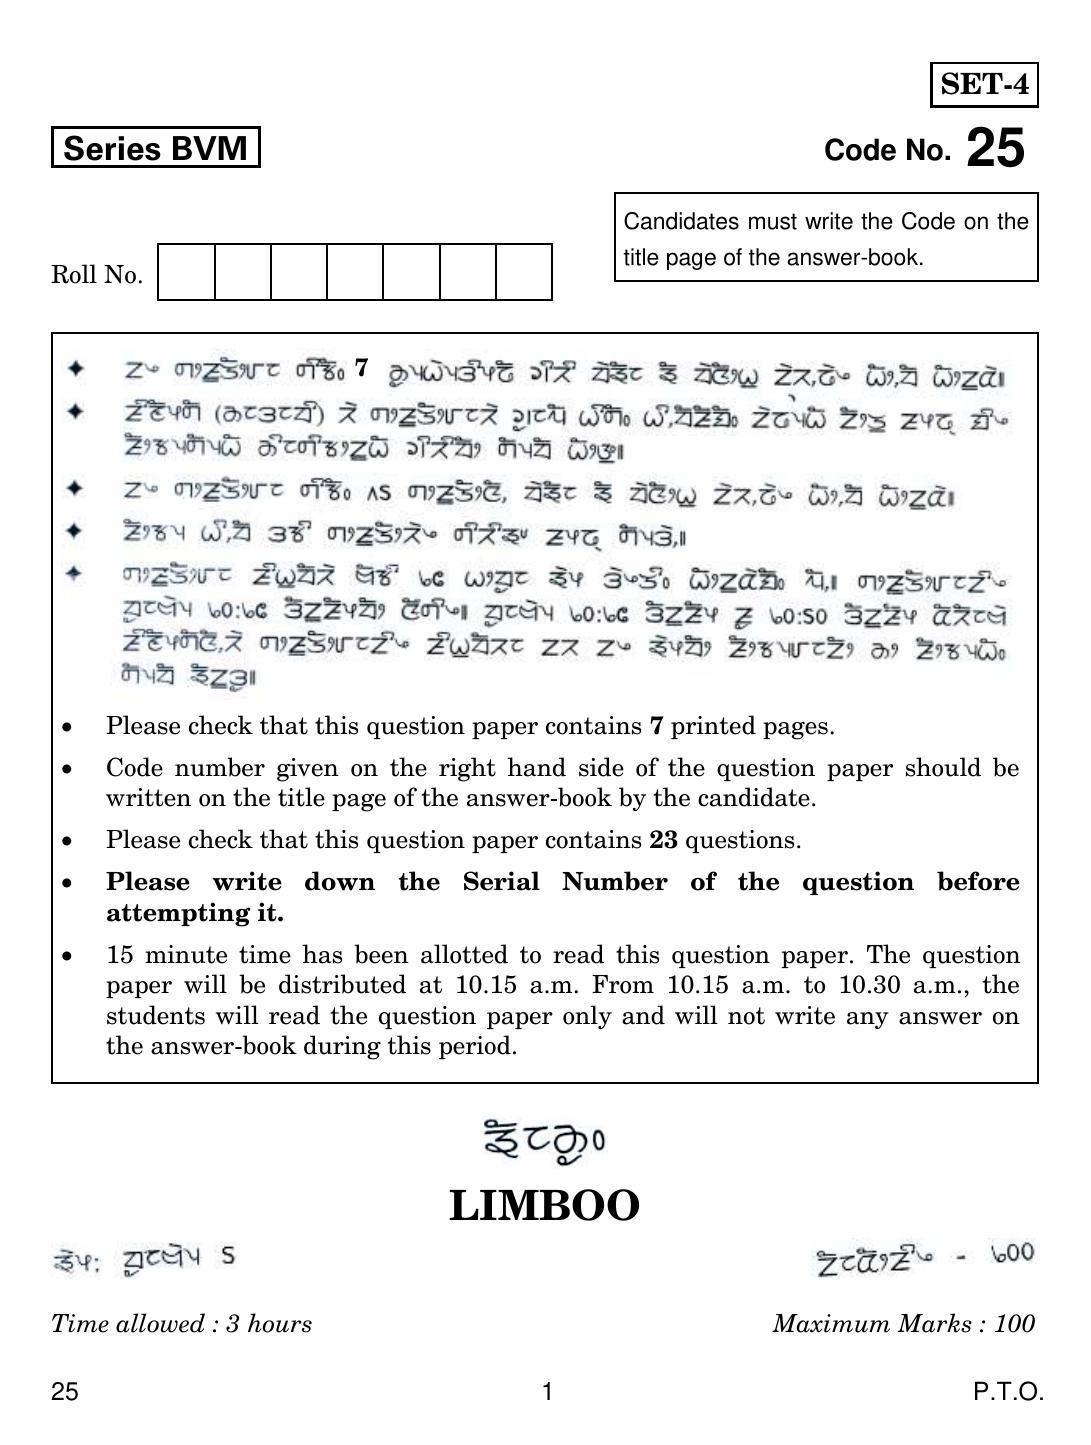 CBSE Class 12 25 Limboo 2019 Question Paper - Page 1